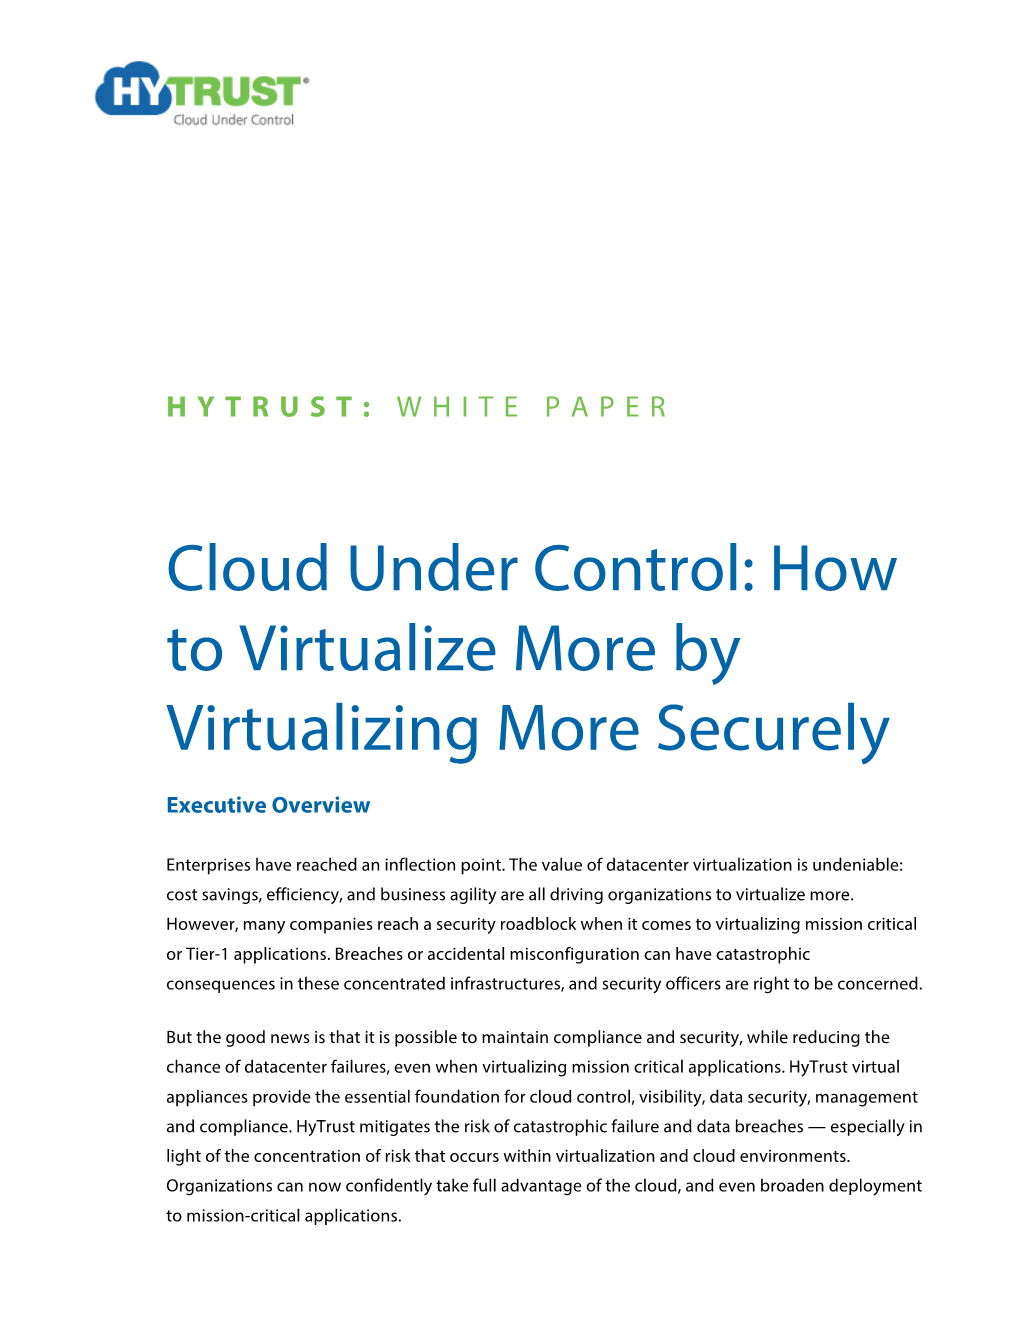 Cloud Under Control: How to Virtualize More by Virtualizing More Securely